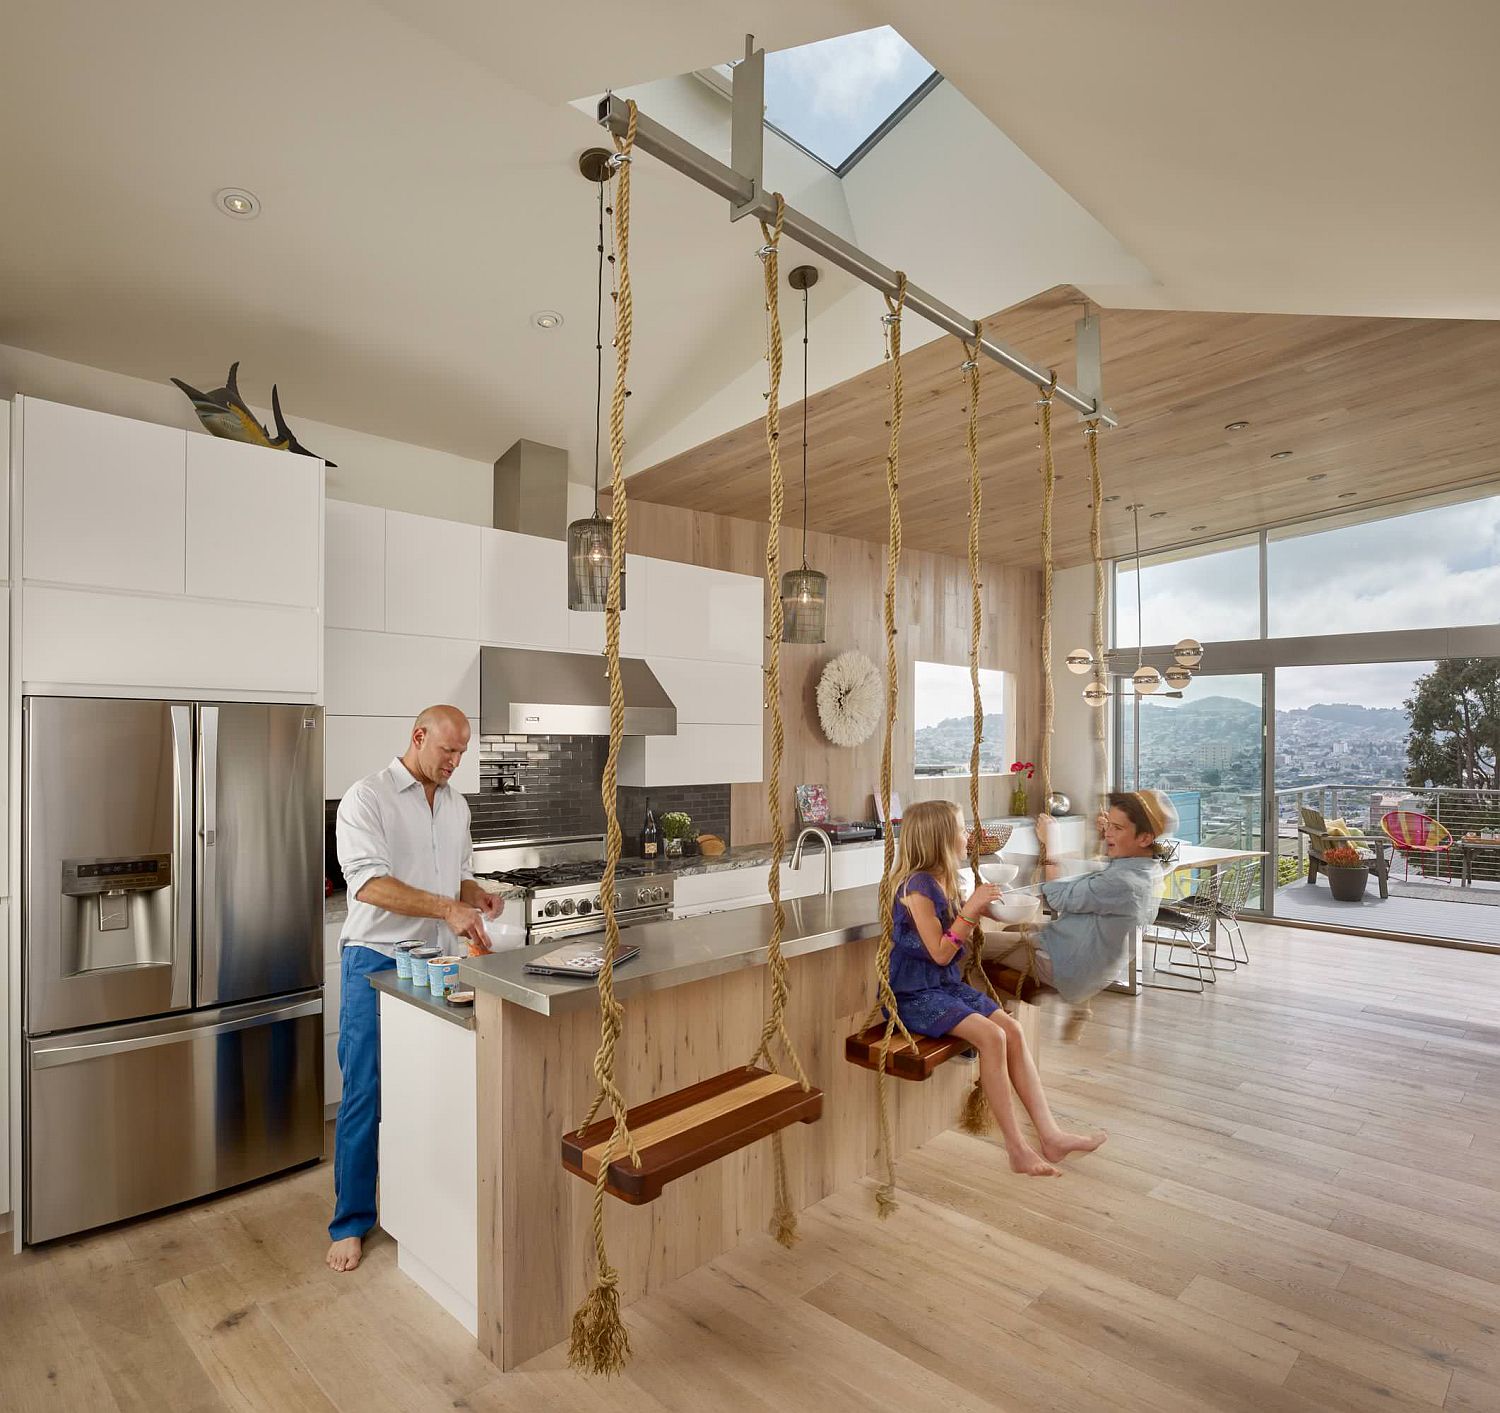 Swing-seats-suspended-from-the-ceiling-along-with-skylight-and-lovely-views-give-this-kitchen-a-refreshingly-fun-appeal